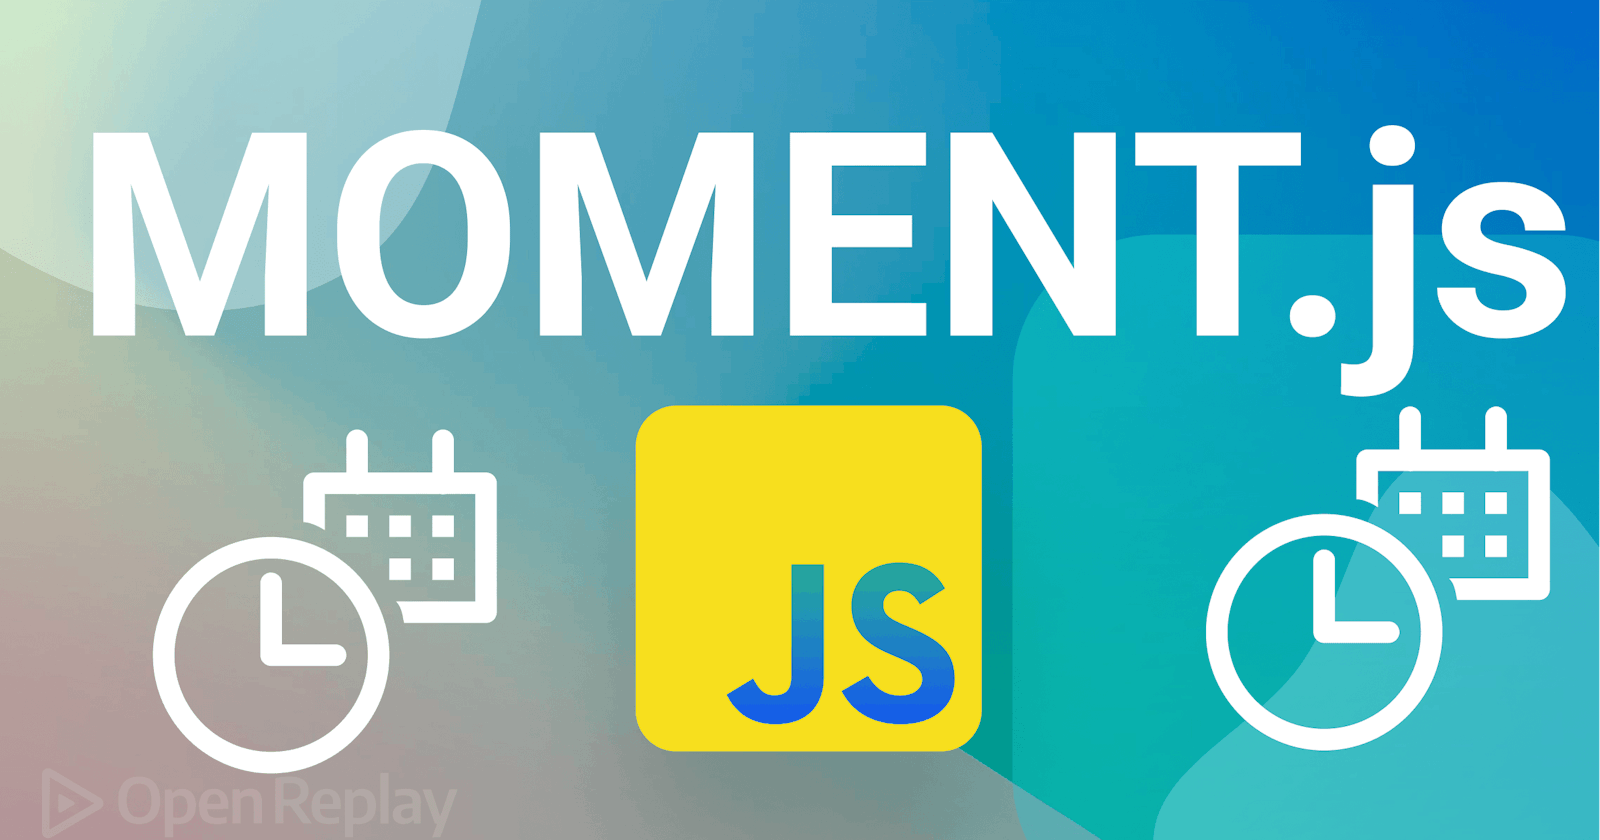 Common date/time operations without Moment.js